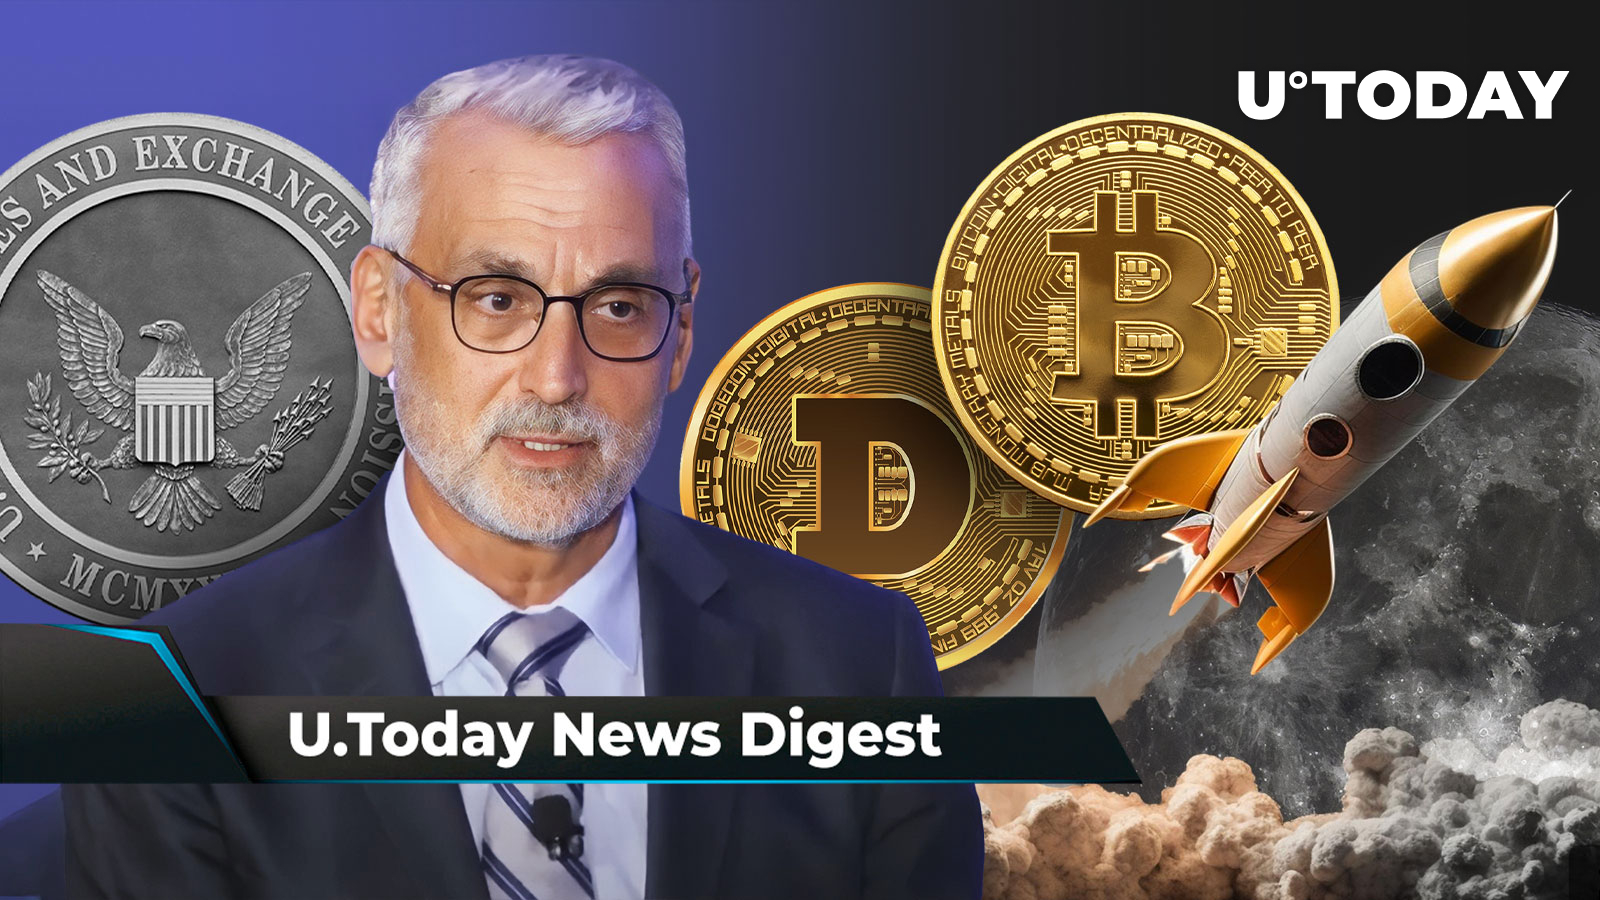 Ripple’s Stuart Alderoty Claims SEC Losing Legal Battles; Physical DOGE, BTC to Head to Actual Moon This Year, Shibarium Hits New Adoption Milestone: Crypto News Digest by U.Today